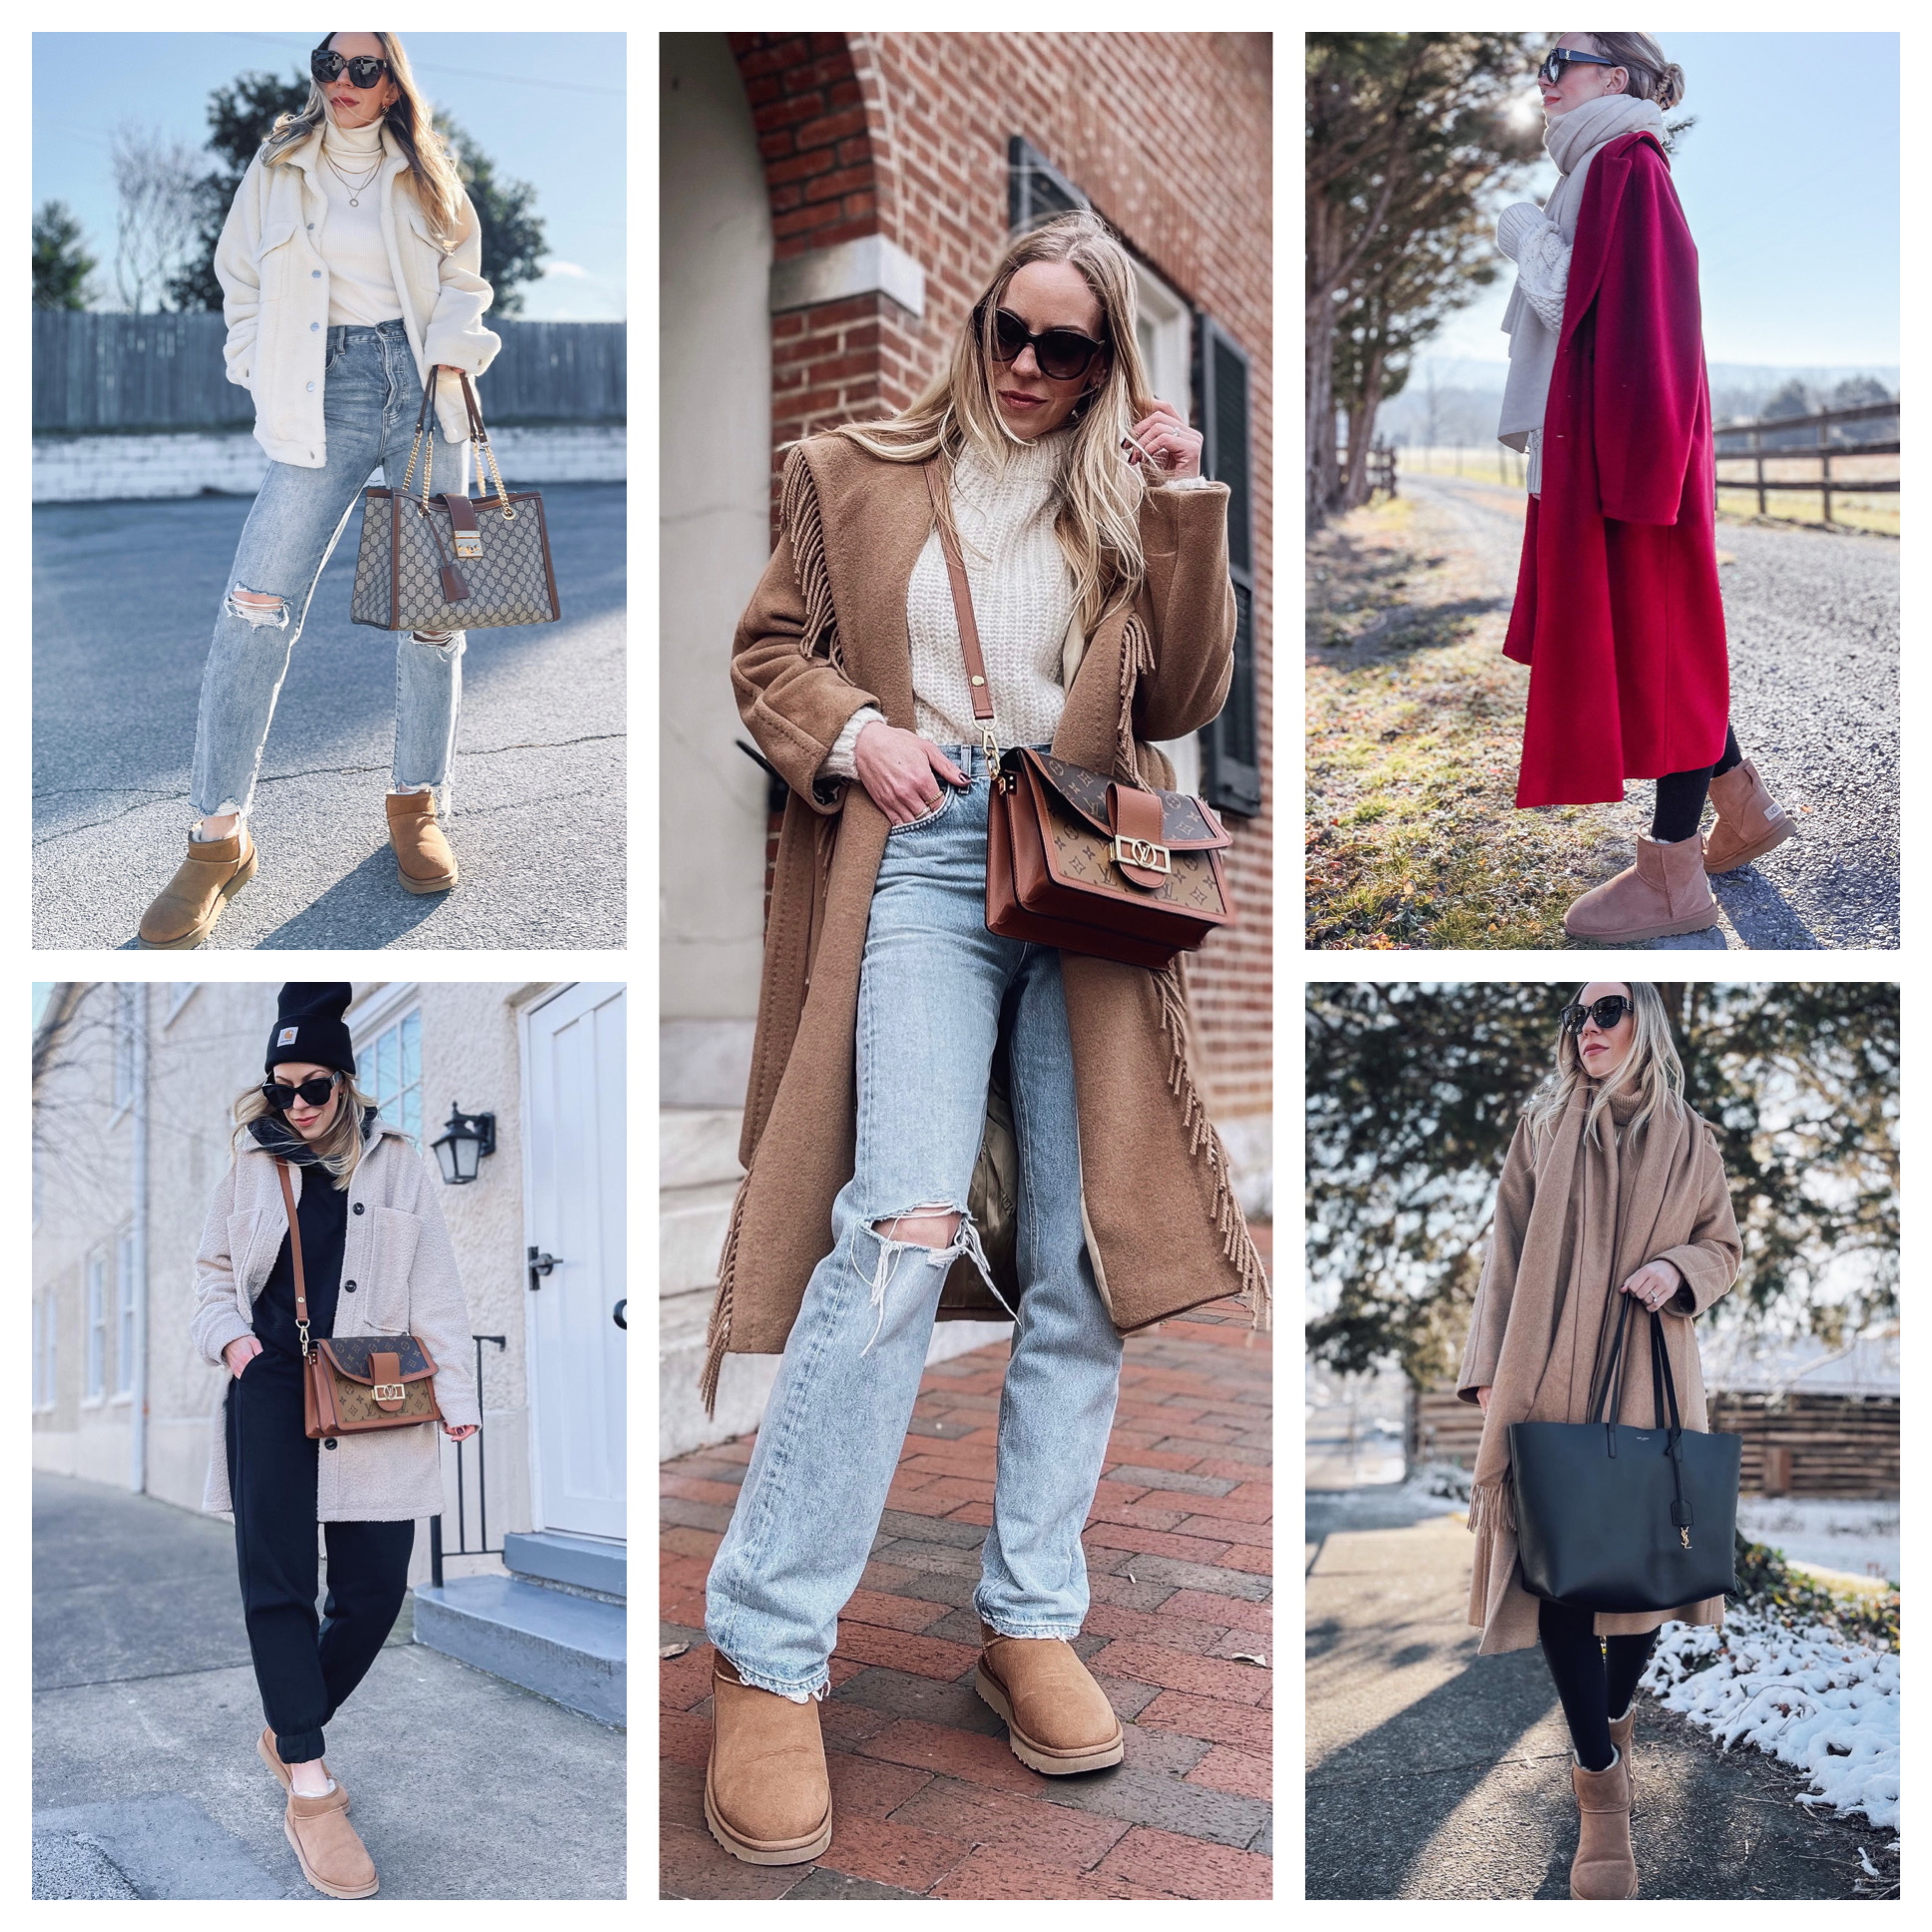 UGG BOOTS WAYS TO WEAR FOR AUTUMN AND WINTER! 30 UGG BOOT OUTFIT IDEAS!